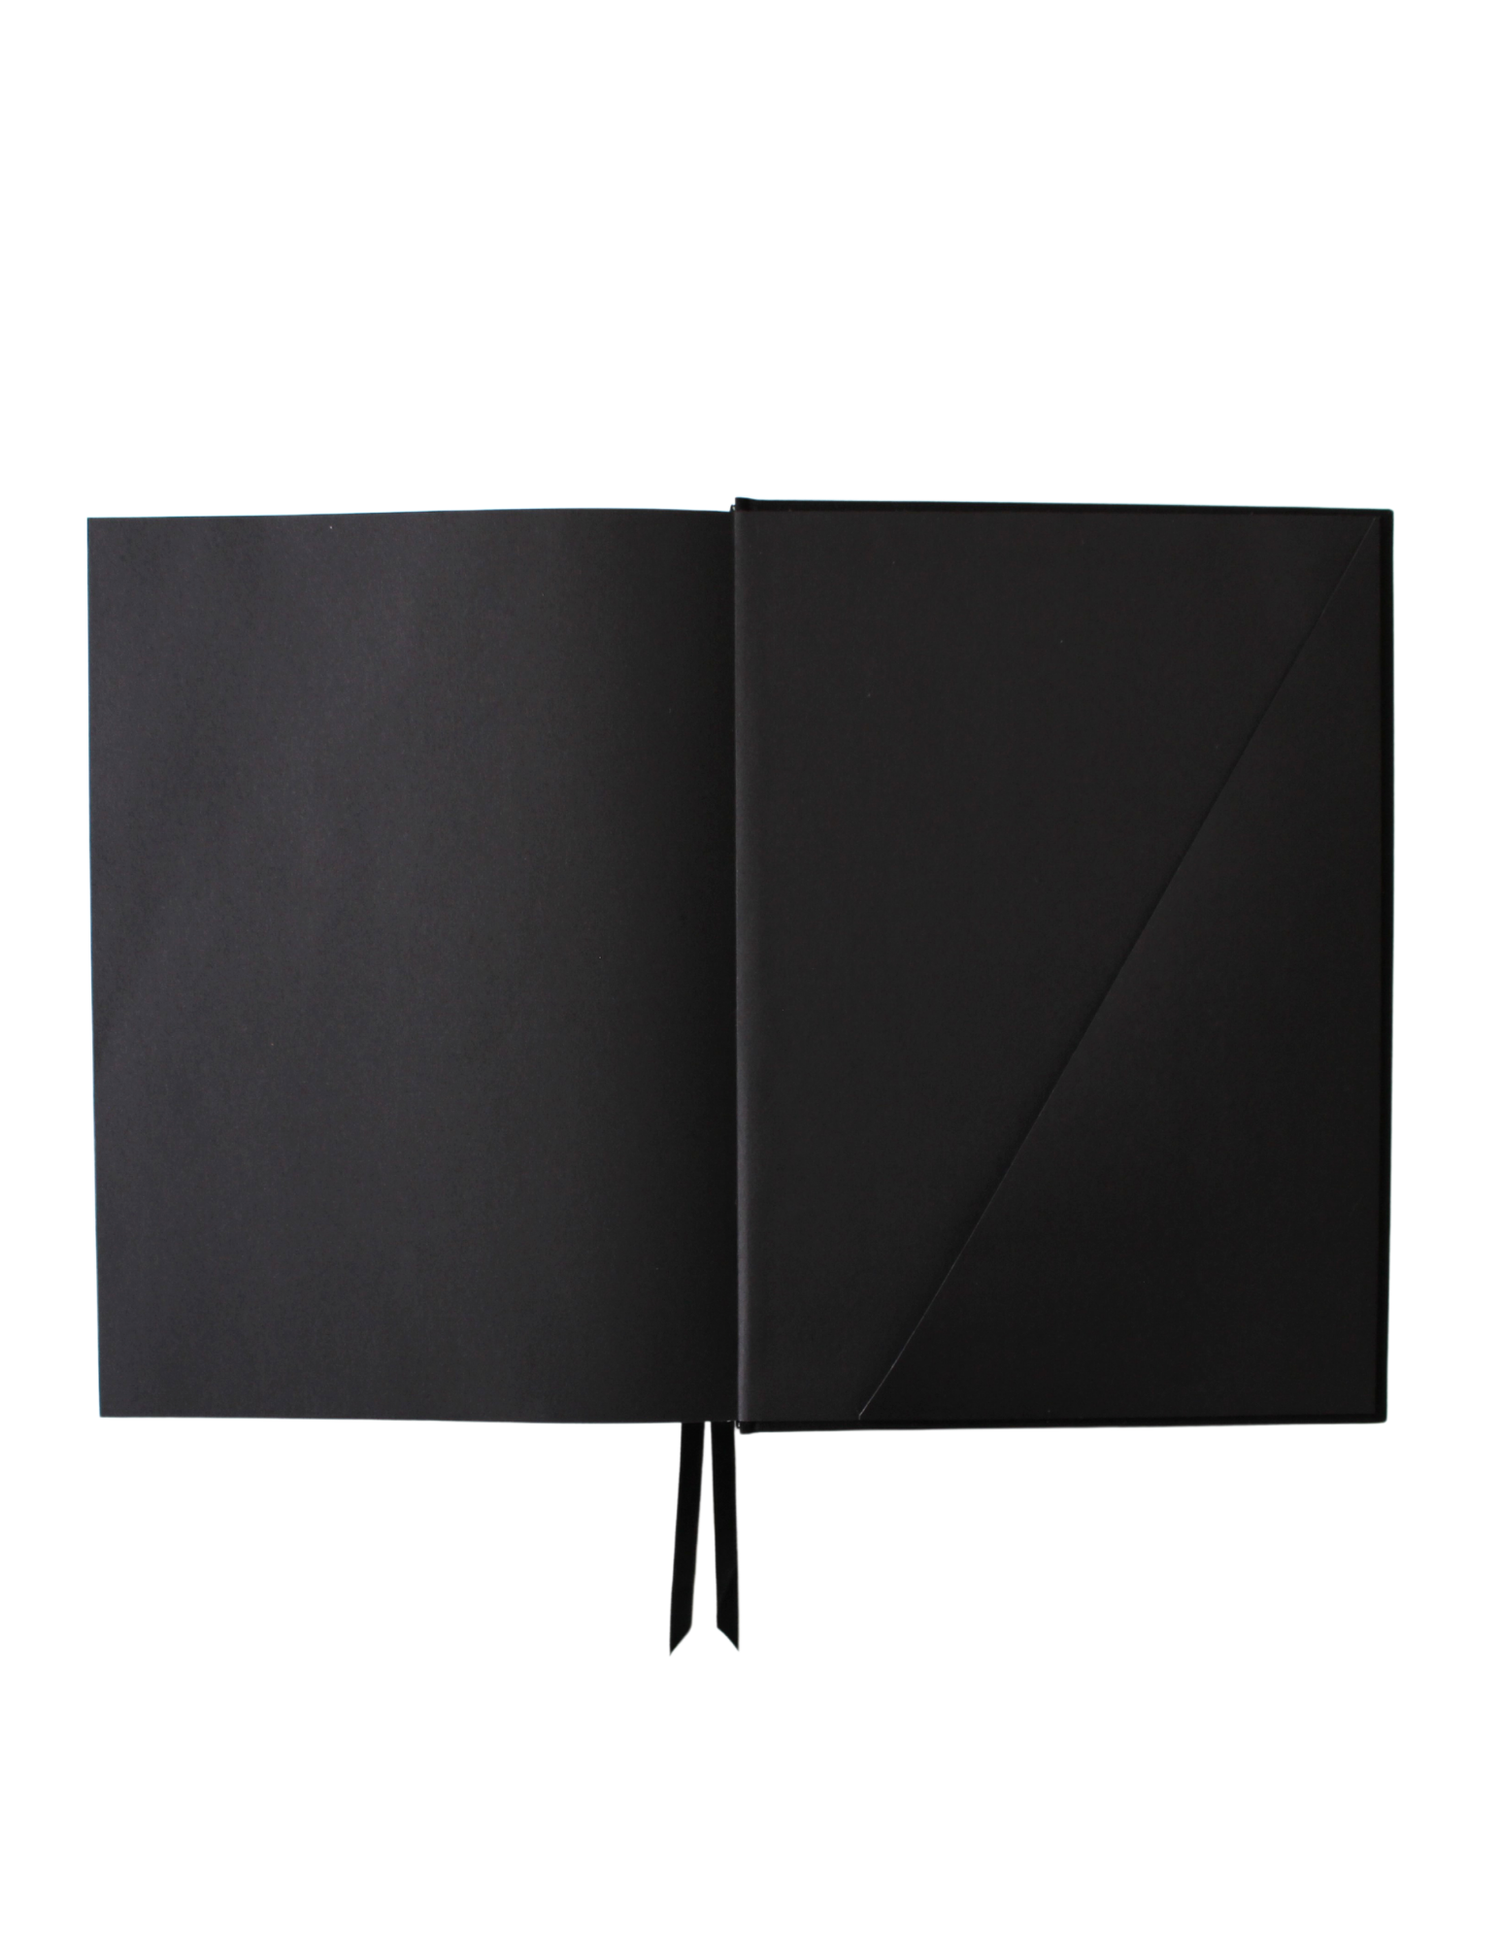 2024 A5 Daily Agenda in Onyx Vegan Leather — The Astral Planner